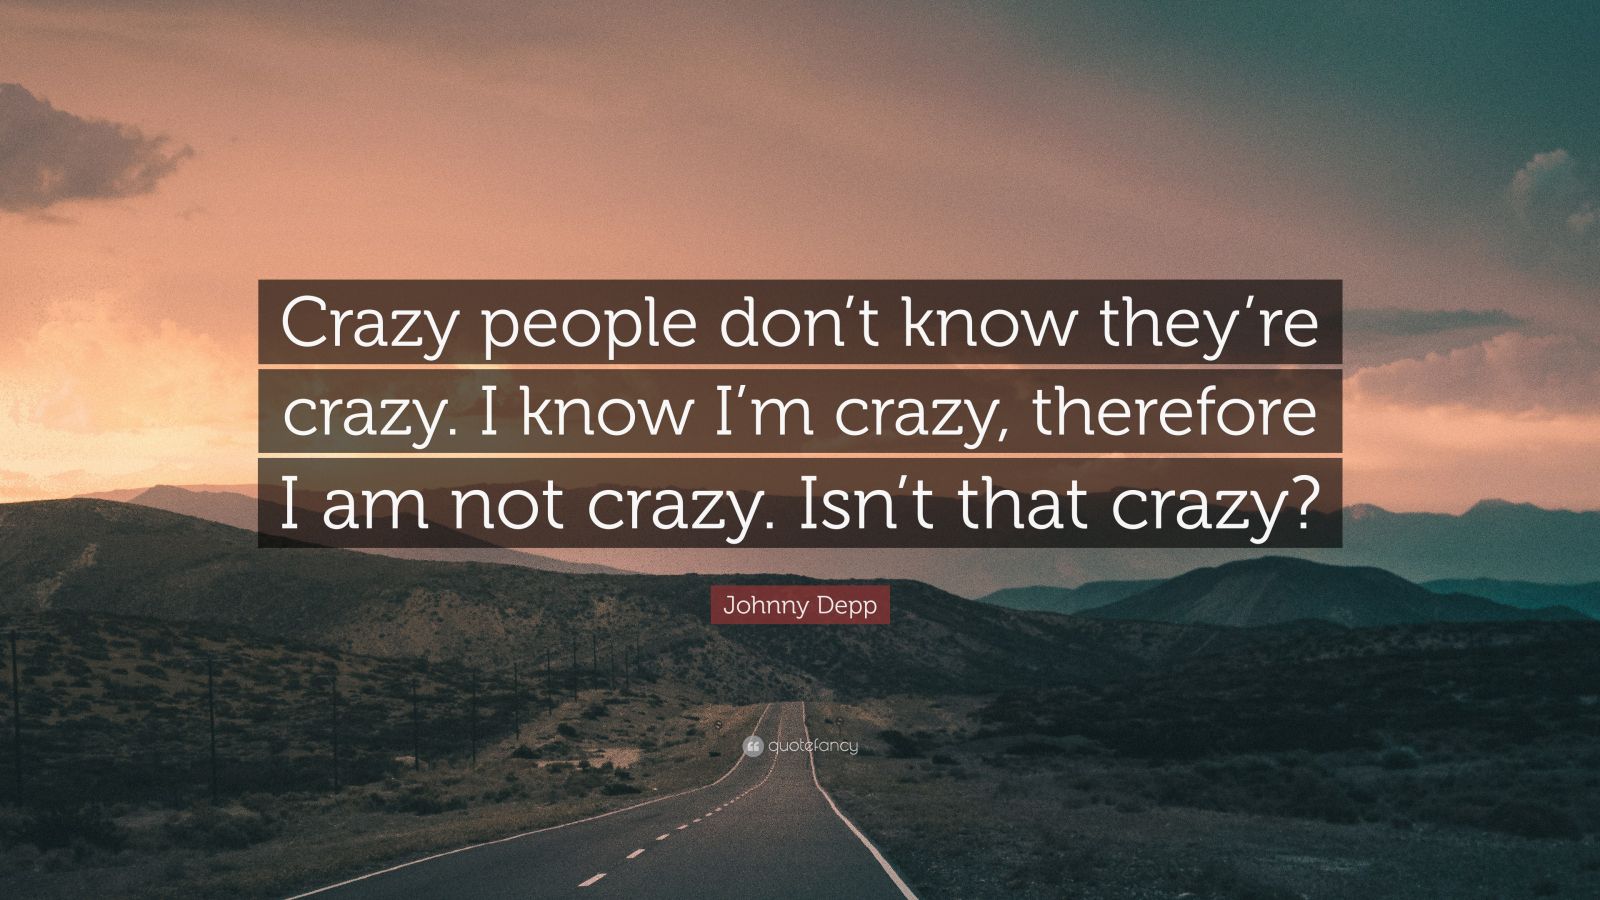 Johnny Depp Quote: “Crazy people don't know they're crazy. I know I'm crazy, therefore I am not crazy. Isn't that crazy?”